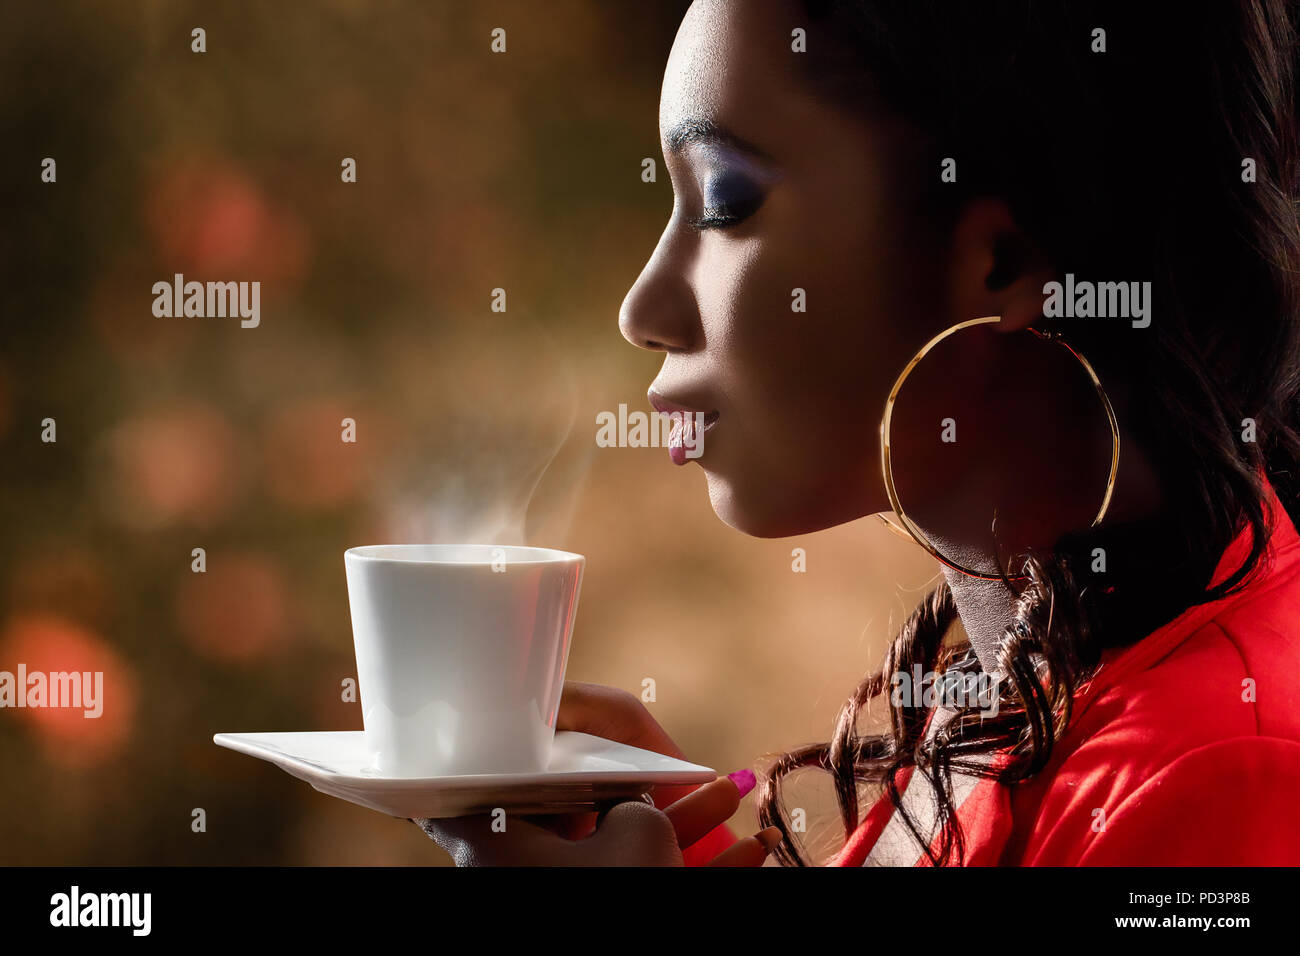 Close up side view of attractive african woman smelling scent of hot beverage.Low key portrait of woman with directional backlit ambient light holding Stock Photo